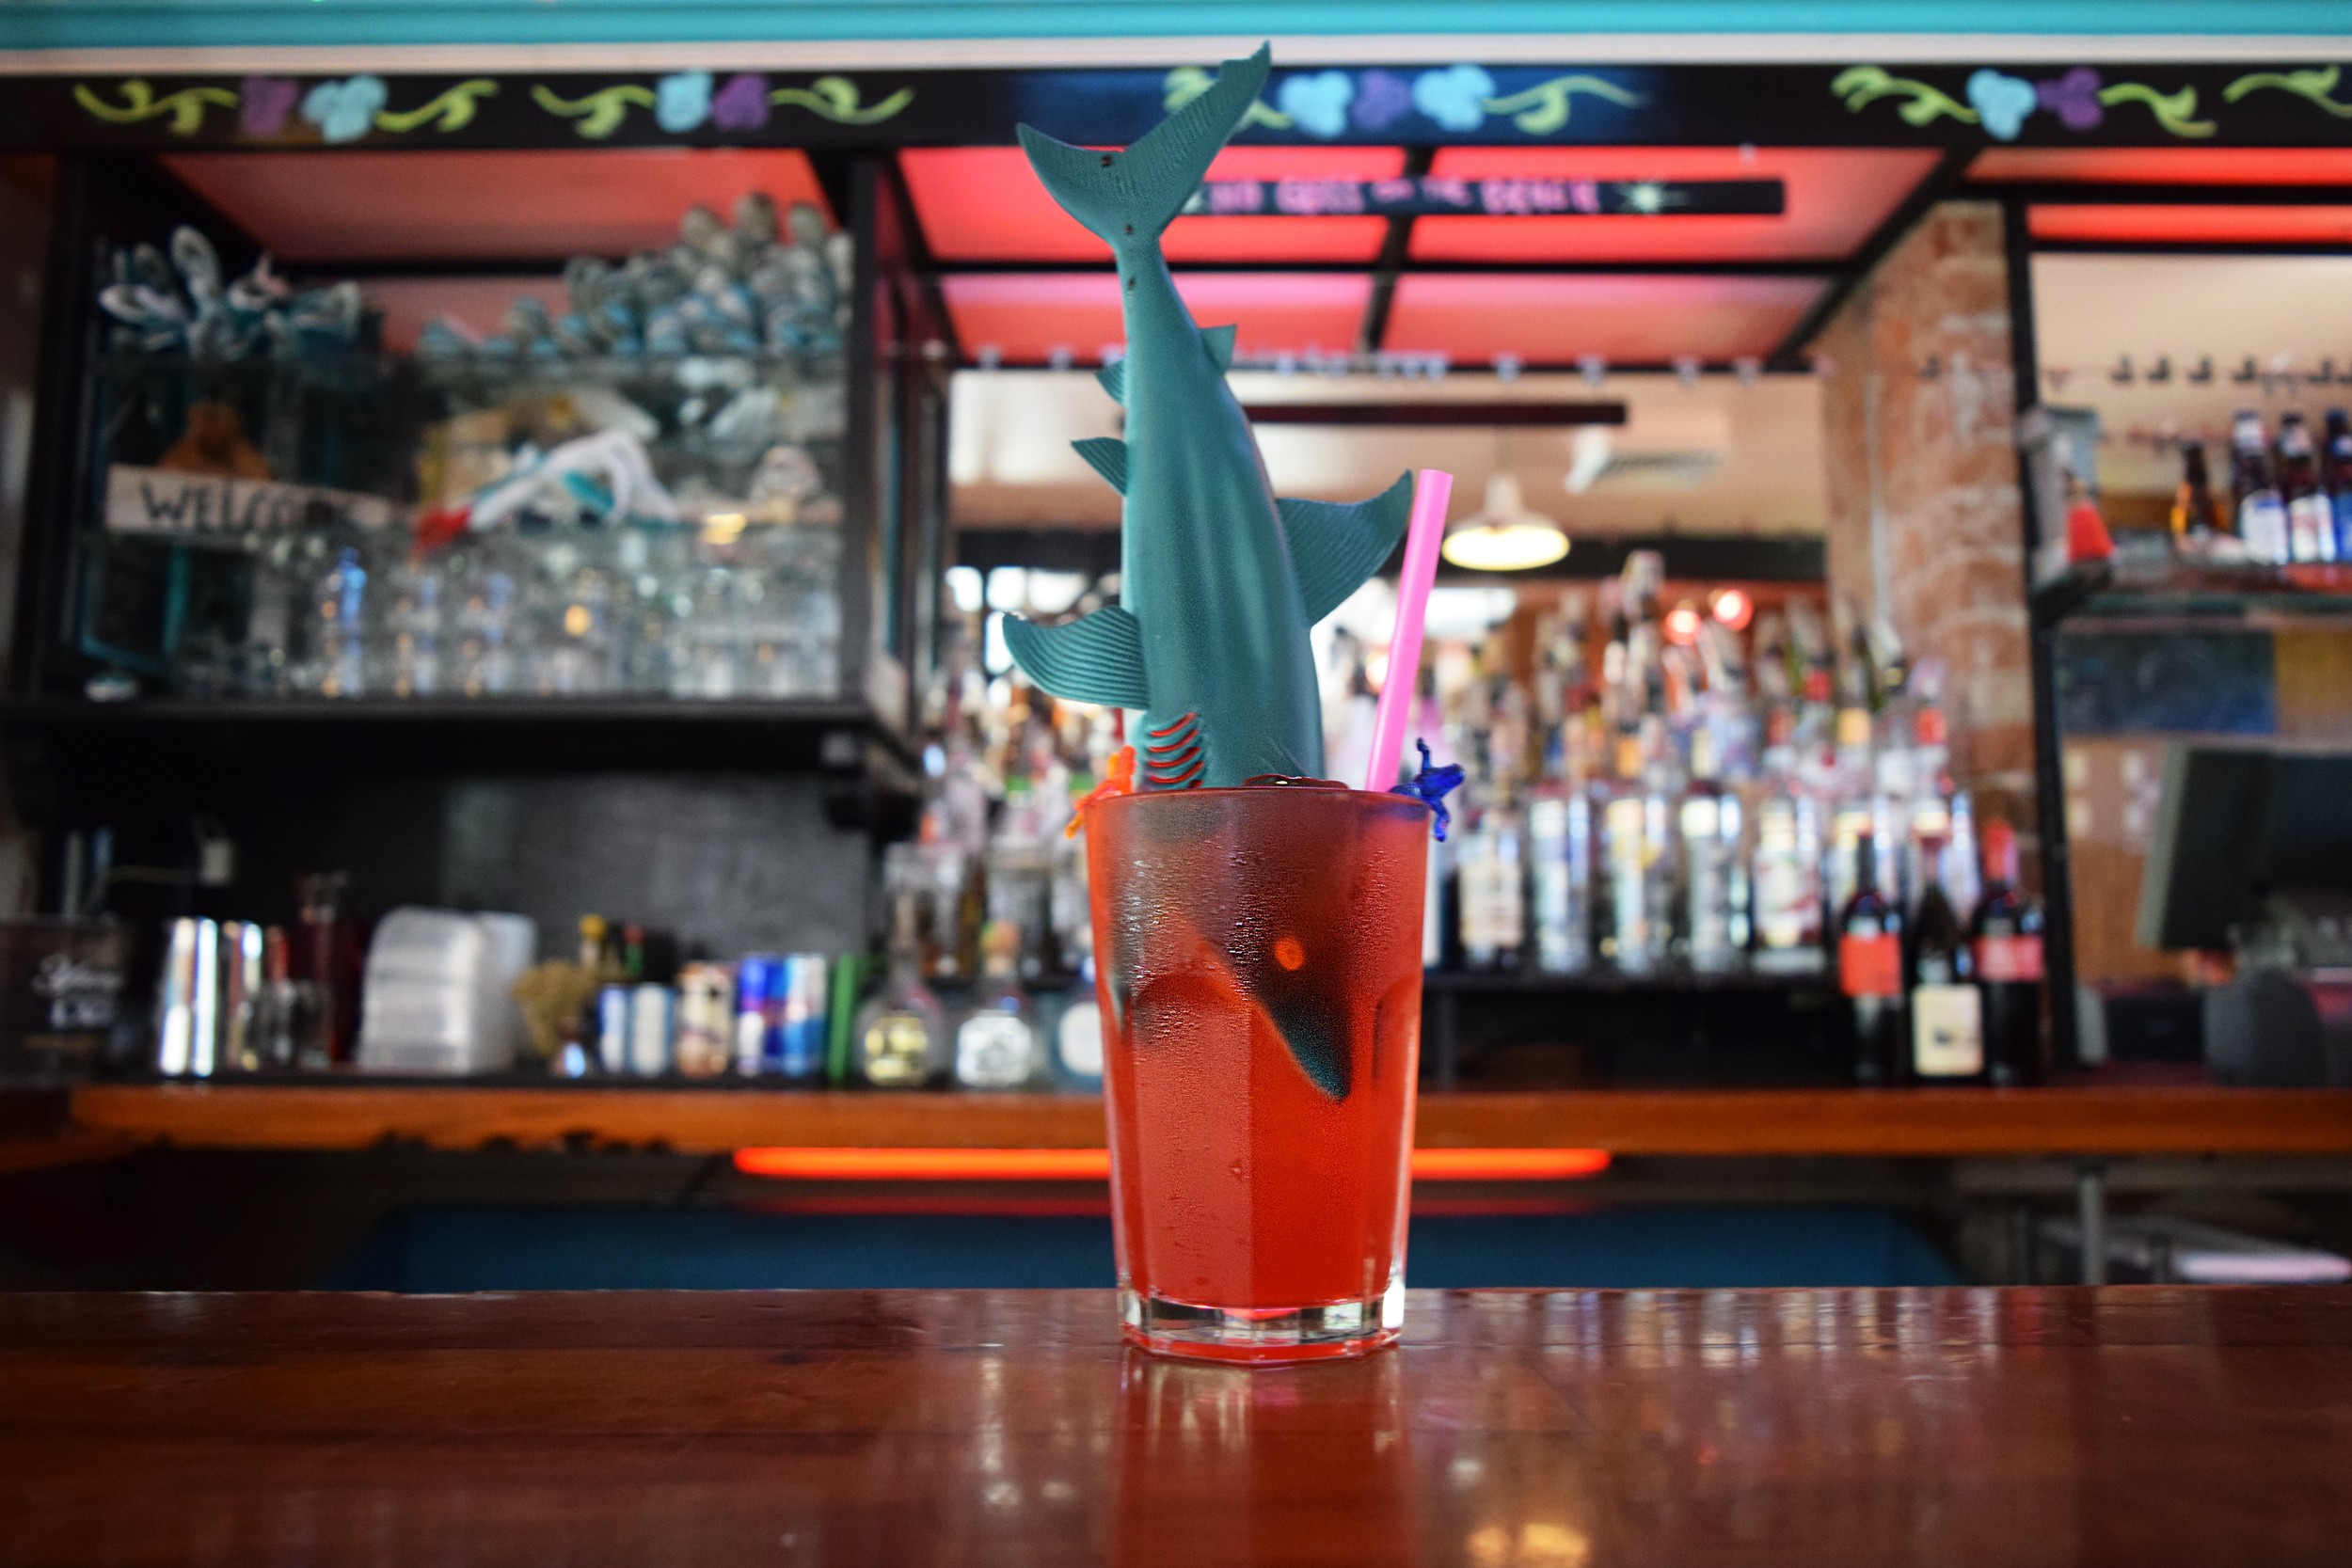 The Shark Attack, a specialty drink offered at Lucy's.